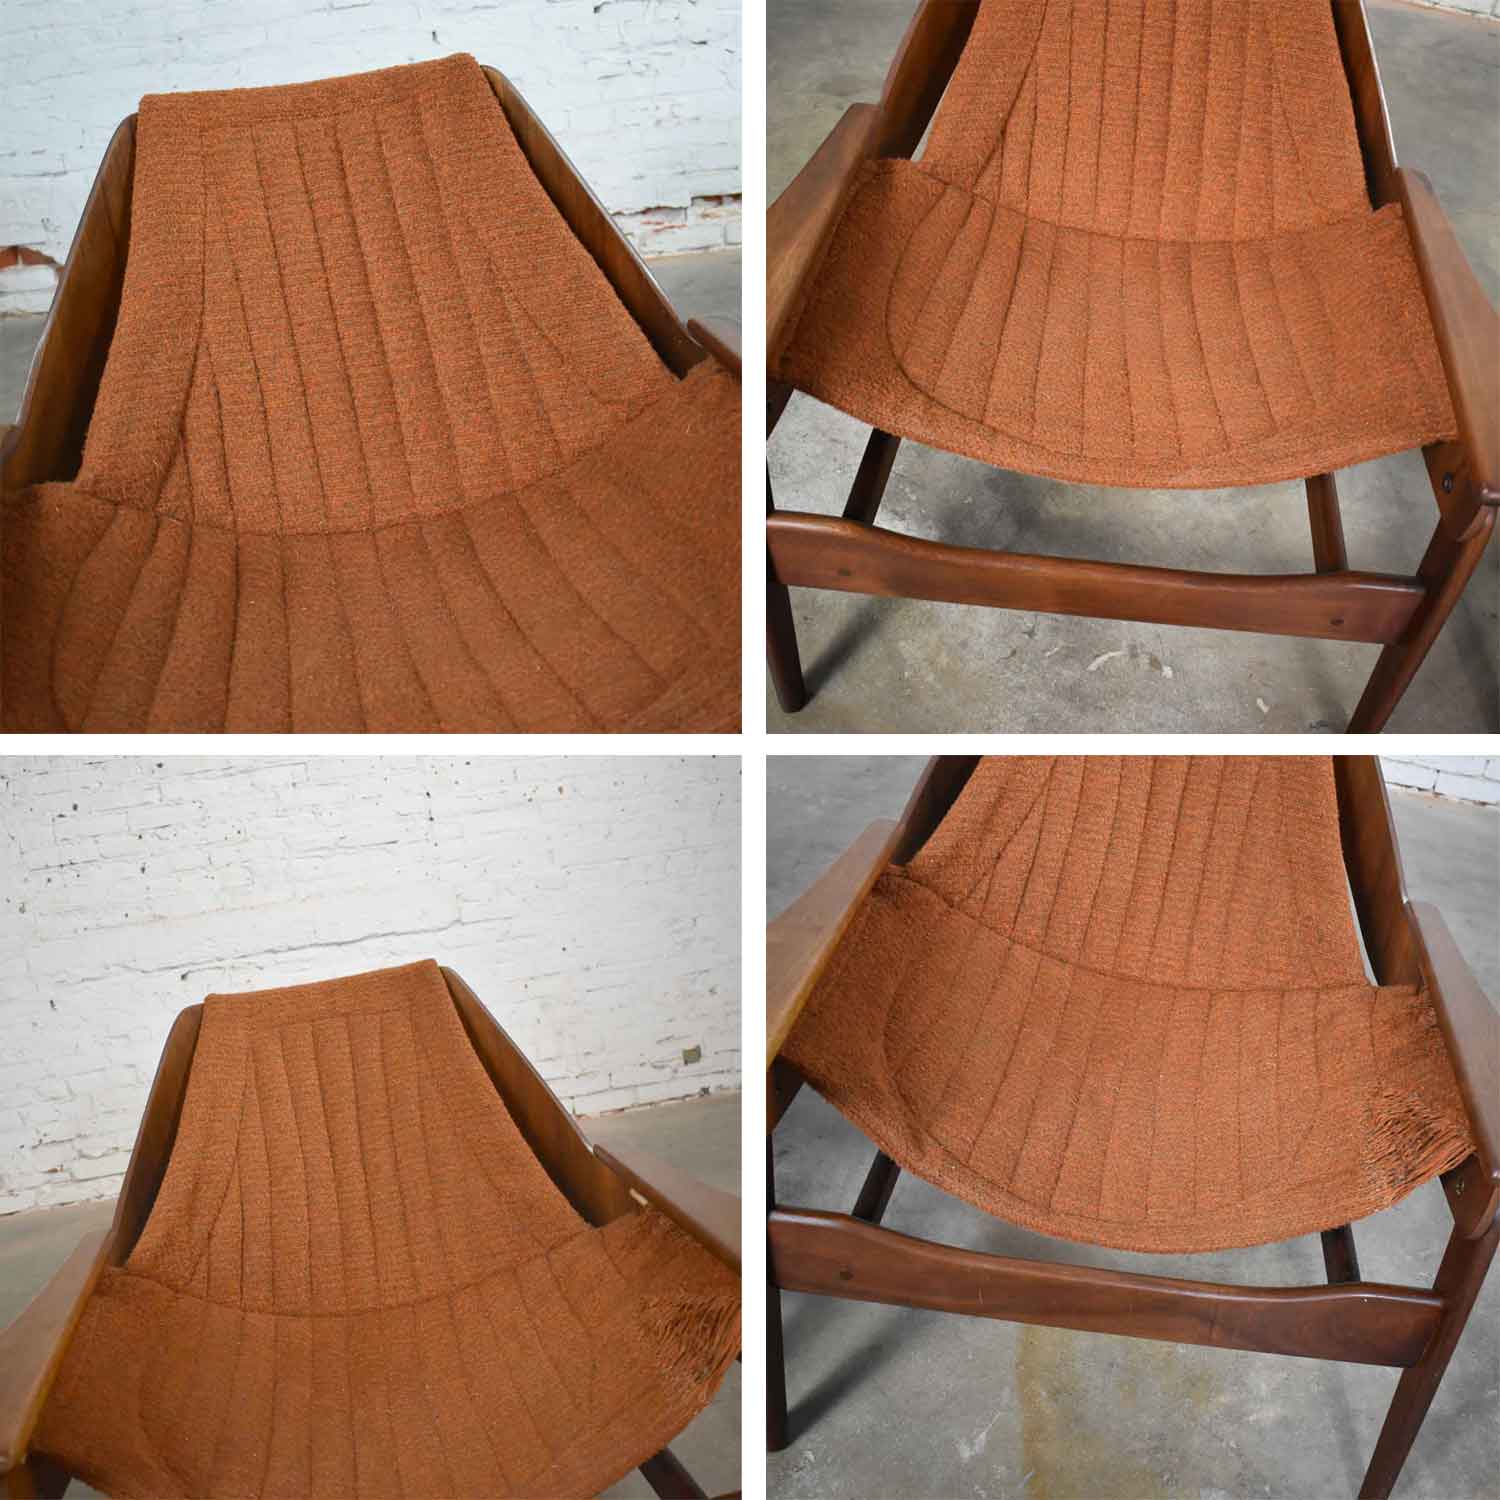 Mid Century Modern Triumph I Sling Chairs by Jerry Johnson for Charlton a Pair